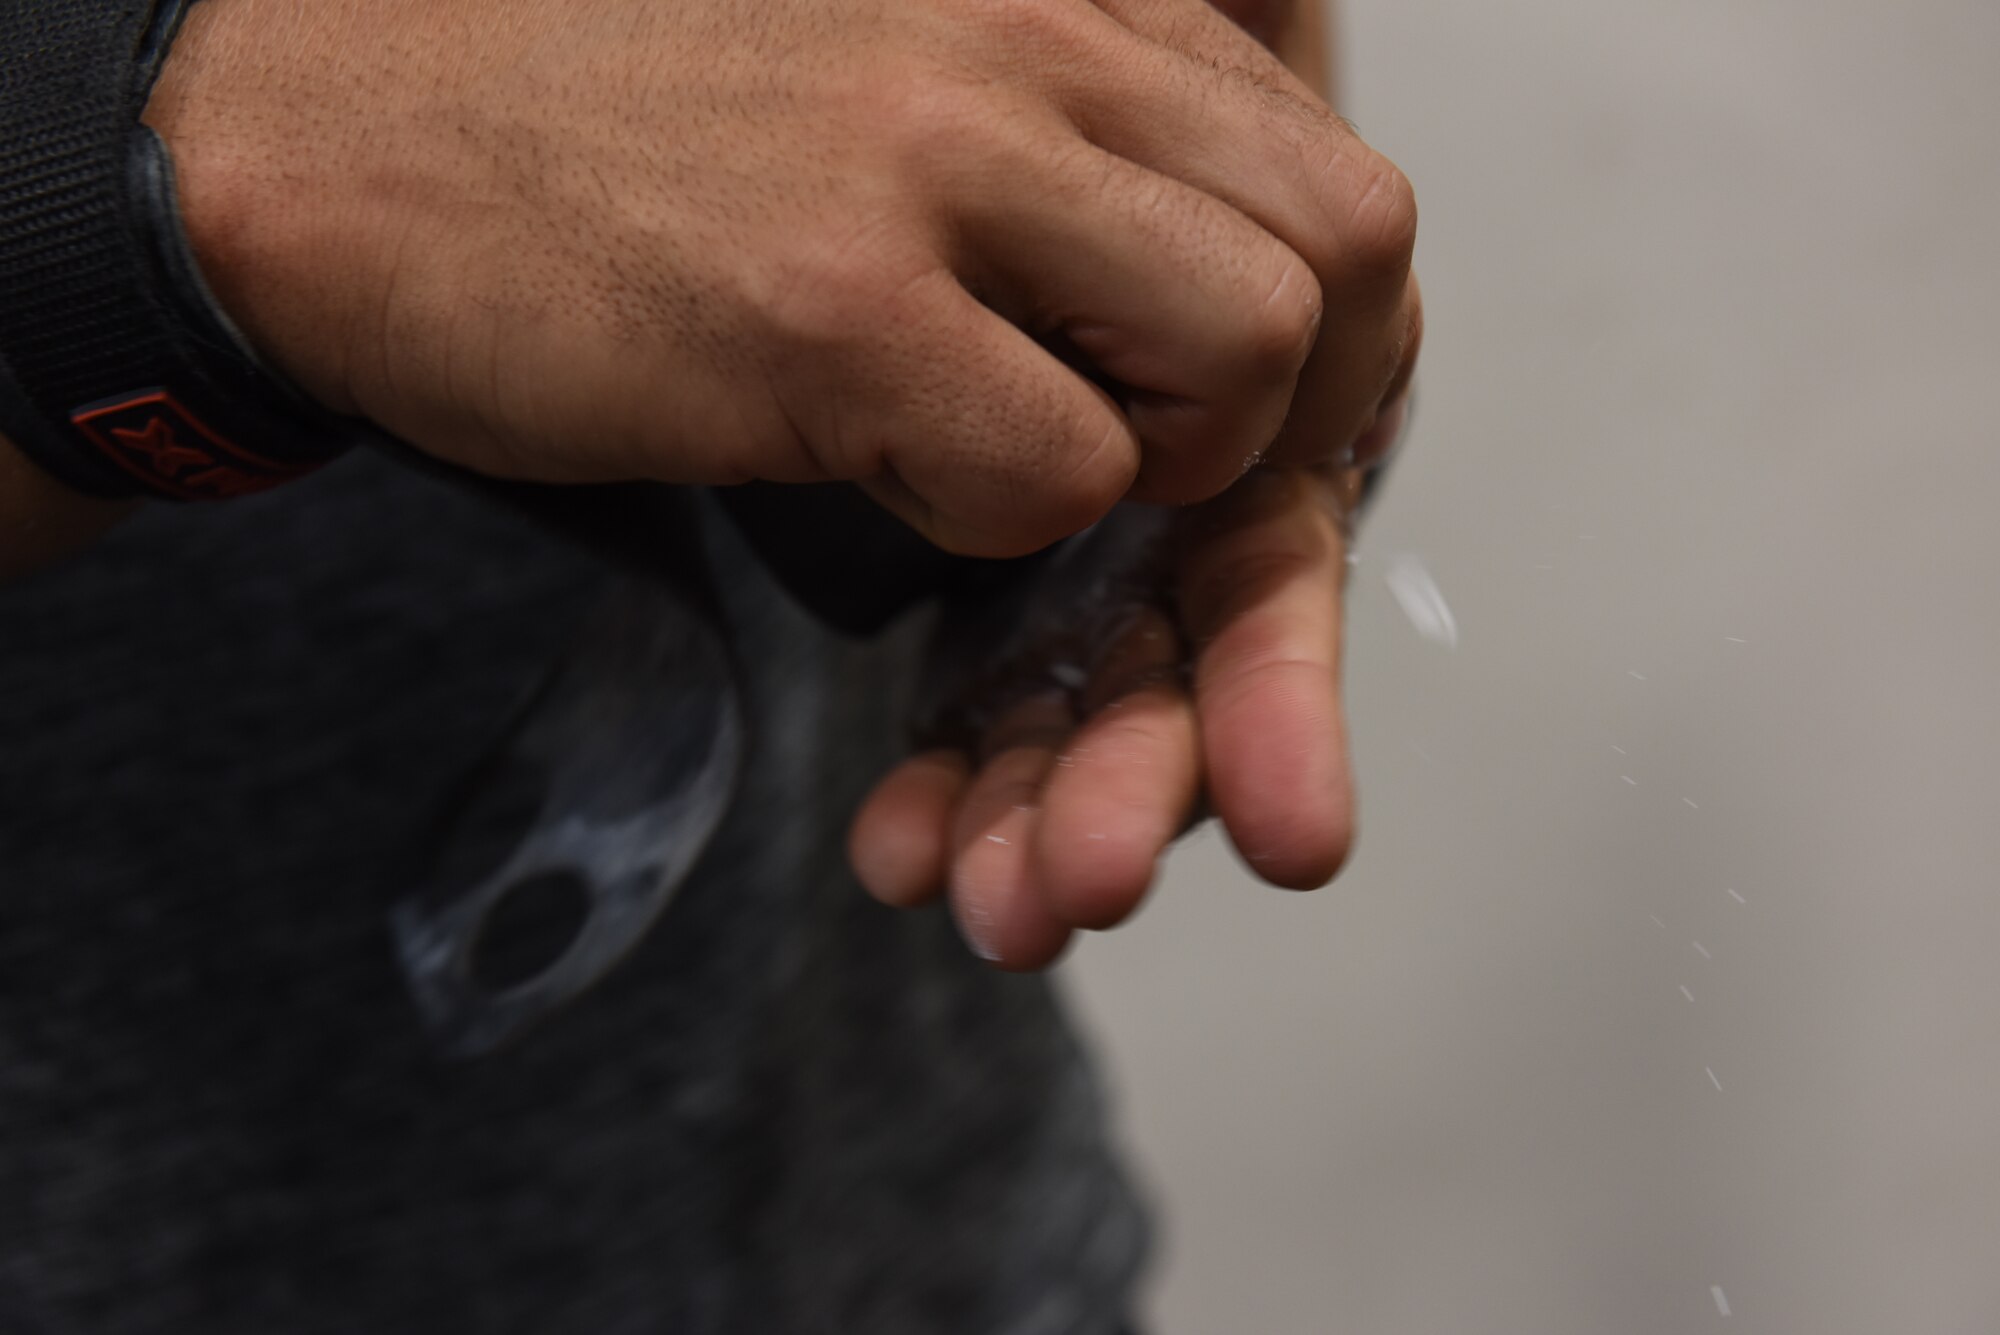 Spanish Patriot Unit member Sargento Alfonso Mendonza, Spanish Patriot Unit, applies chalk to his hands at the Larger than Life Fitness Center on June 5, 2019, at Incirlik Air Base Turkey. Chalk prevents lifters from losing grip while lifting, as well as protects against skin tears. (U.S. Air Force photo by Staff Sgt. Matthew J. Wisher)